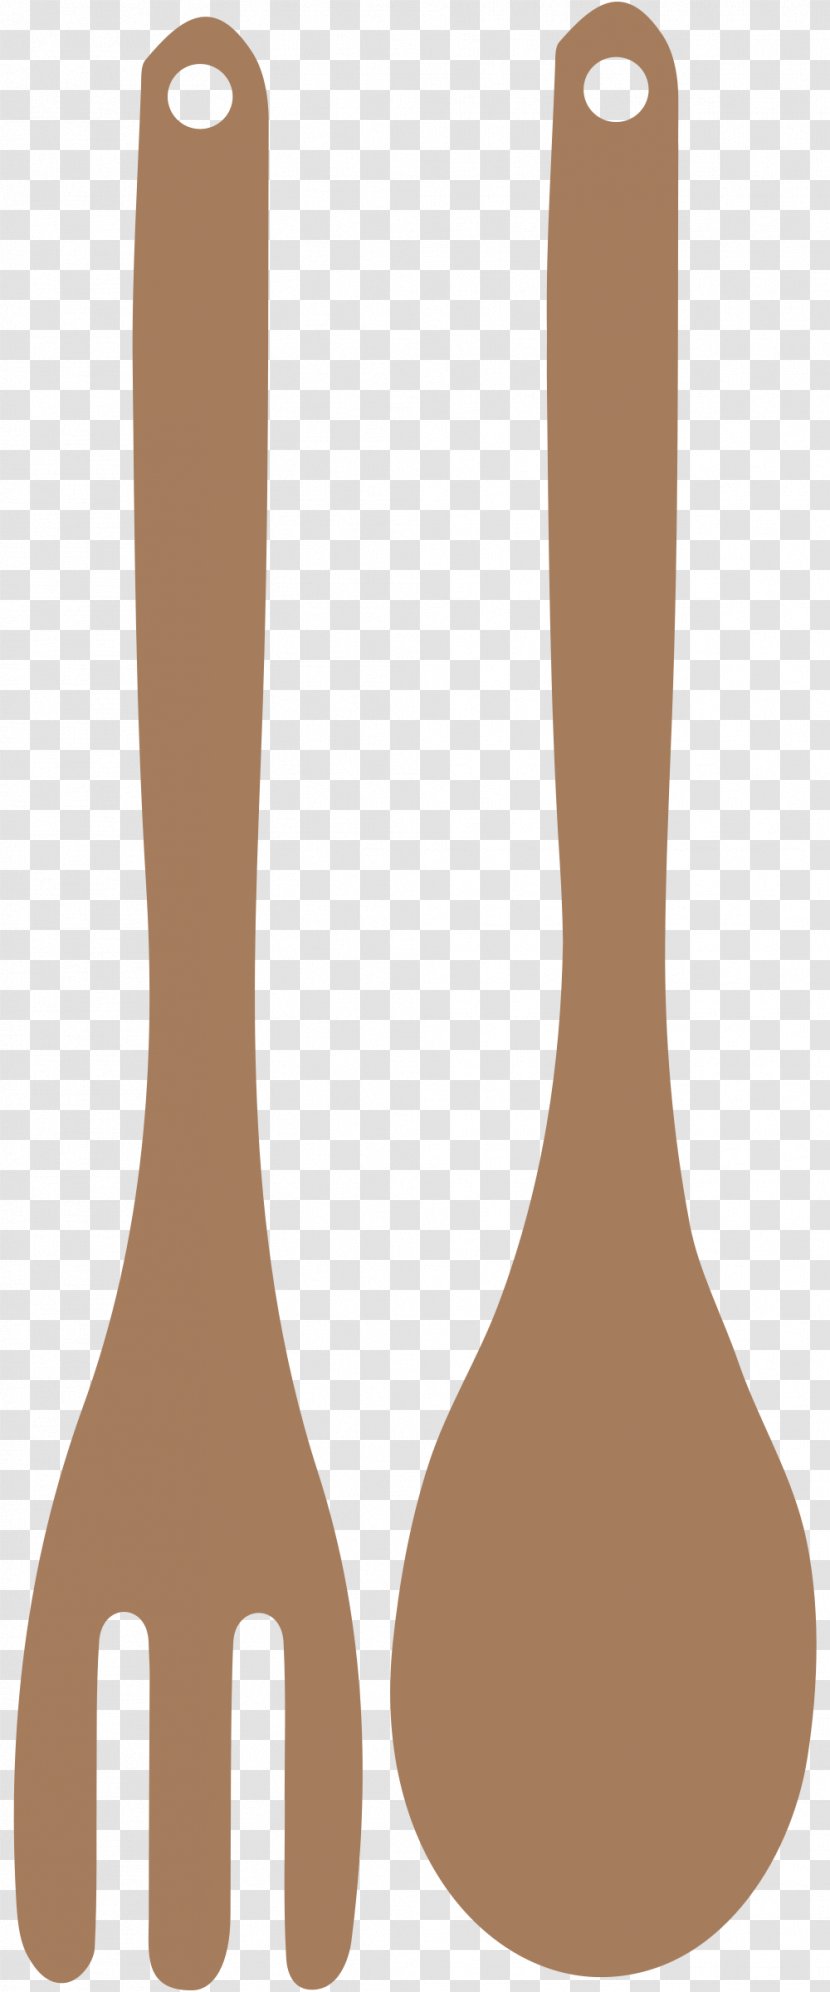 Wooden Spoon Clip Art - Cutlery Transparent PNG